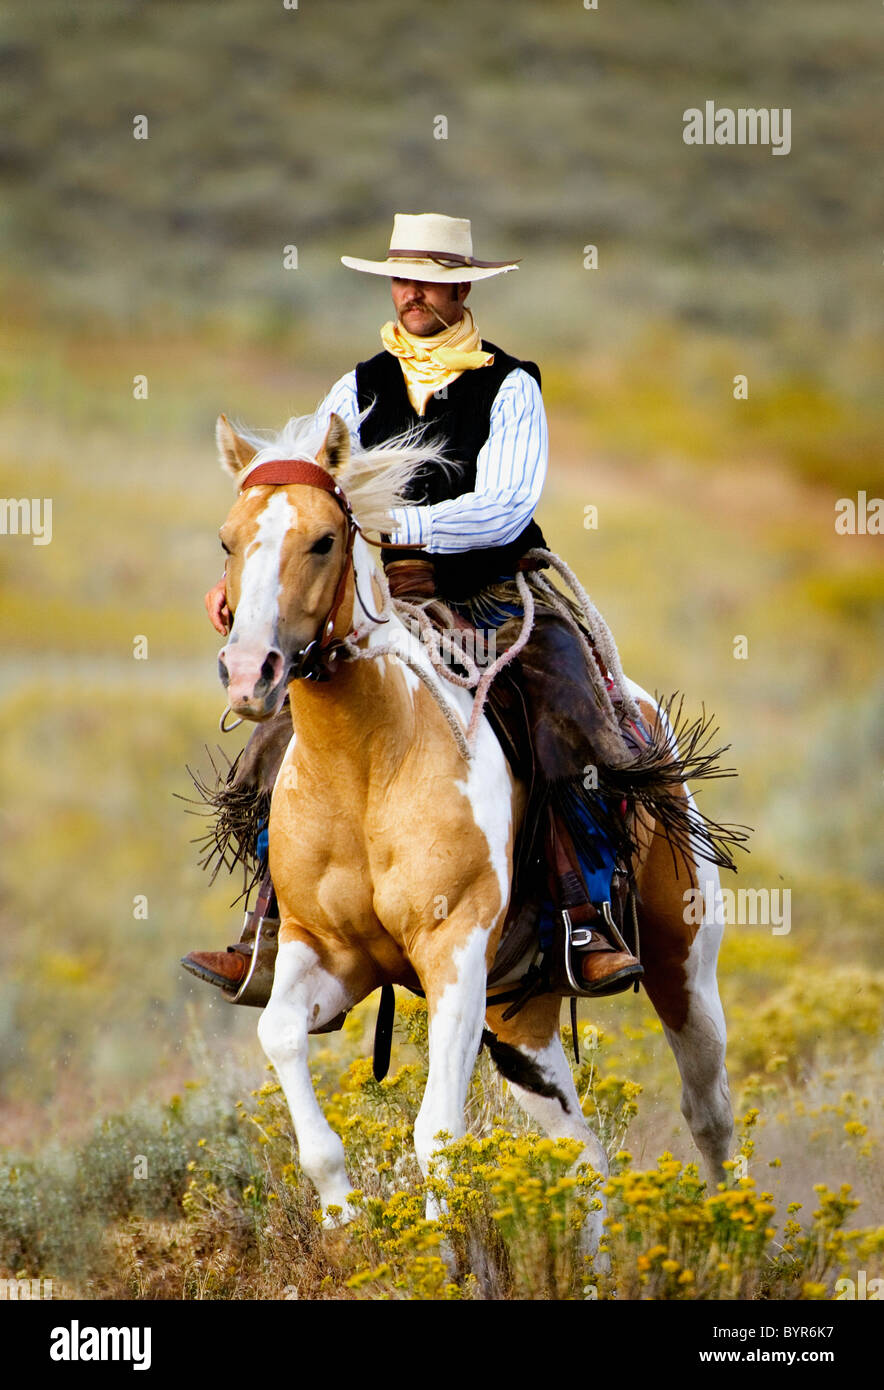 A cowboy with an old fashioned mustache rides a horse through a  field of wildflowers; seneca, oregon, united states of america Stock Photo